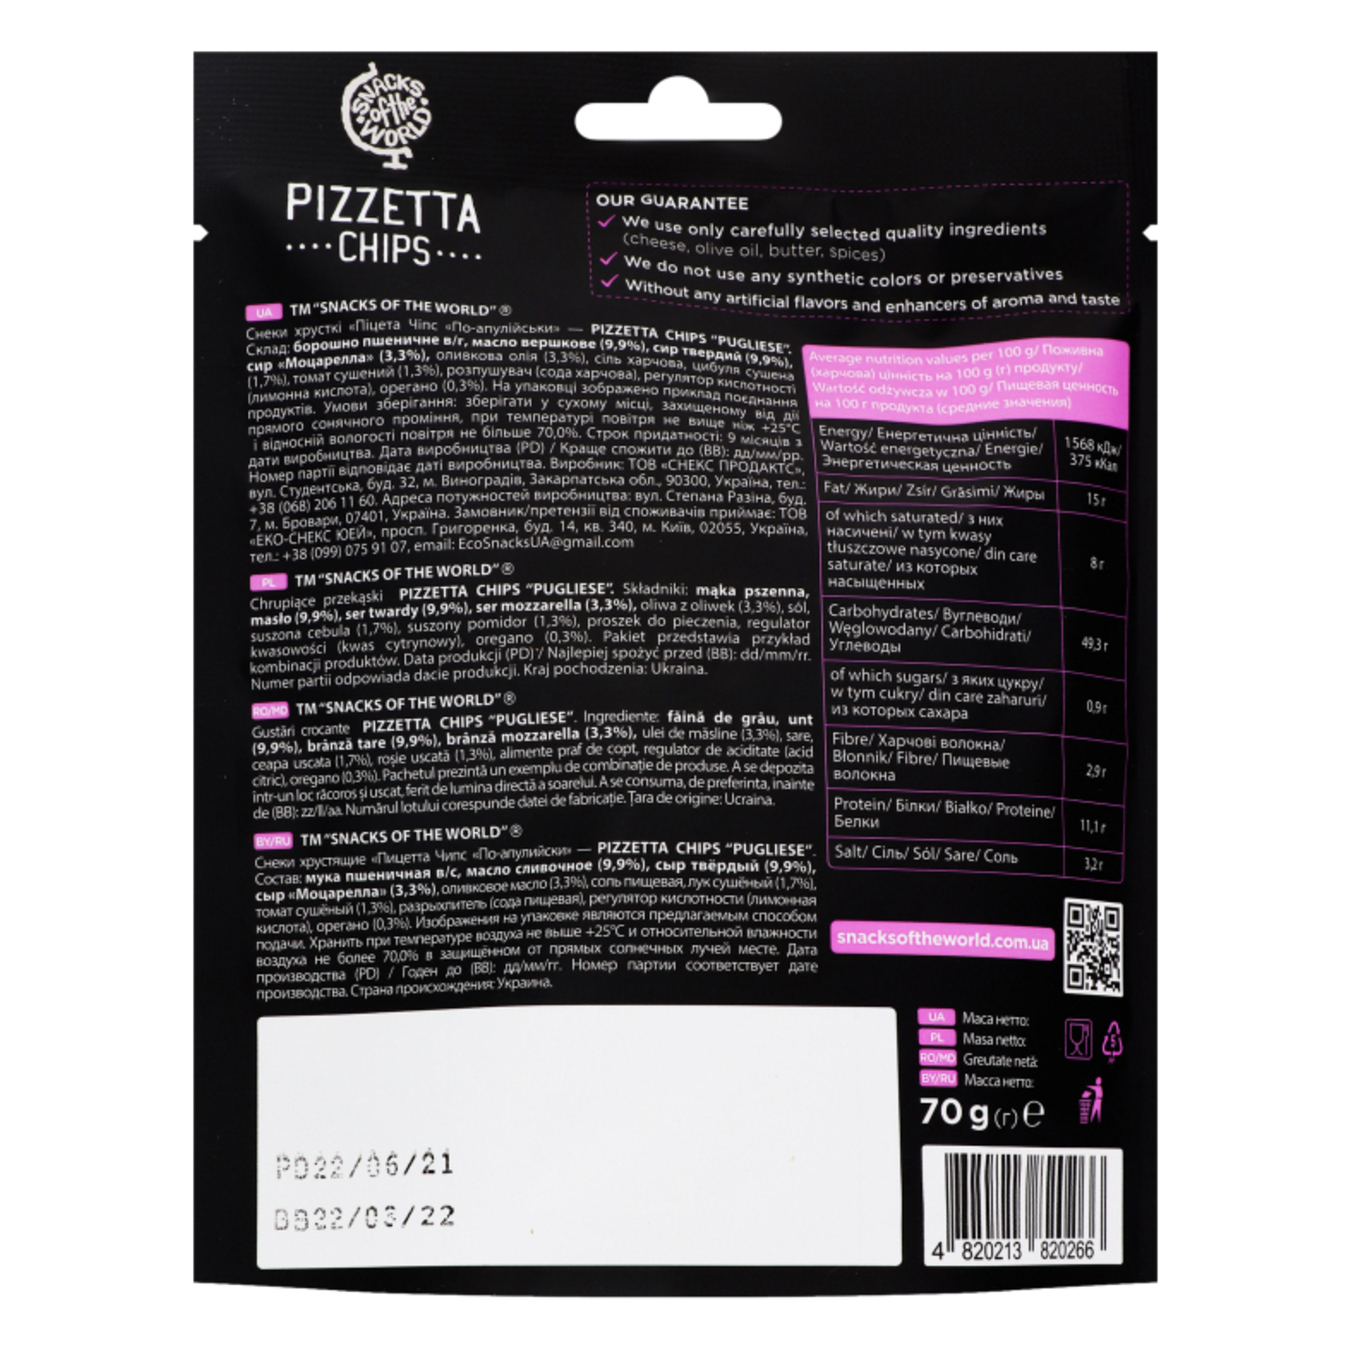 Snack Snacks of the World Pizzetta Chips Apulian style 70g 3